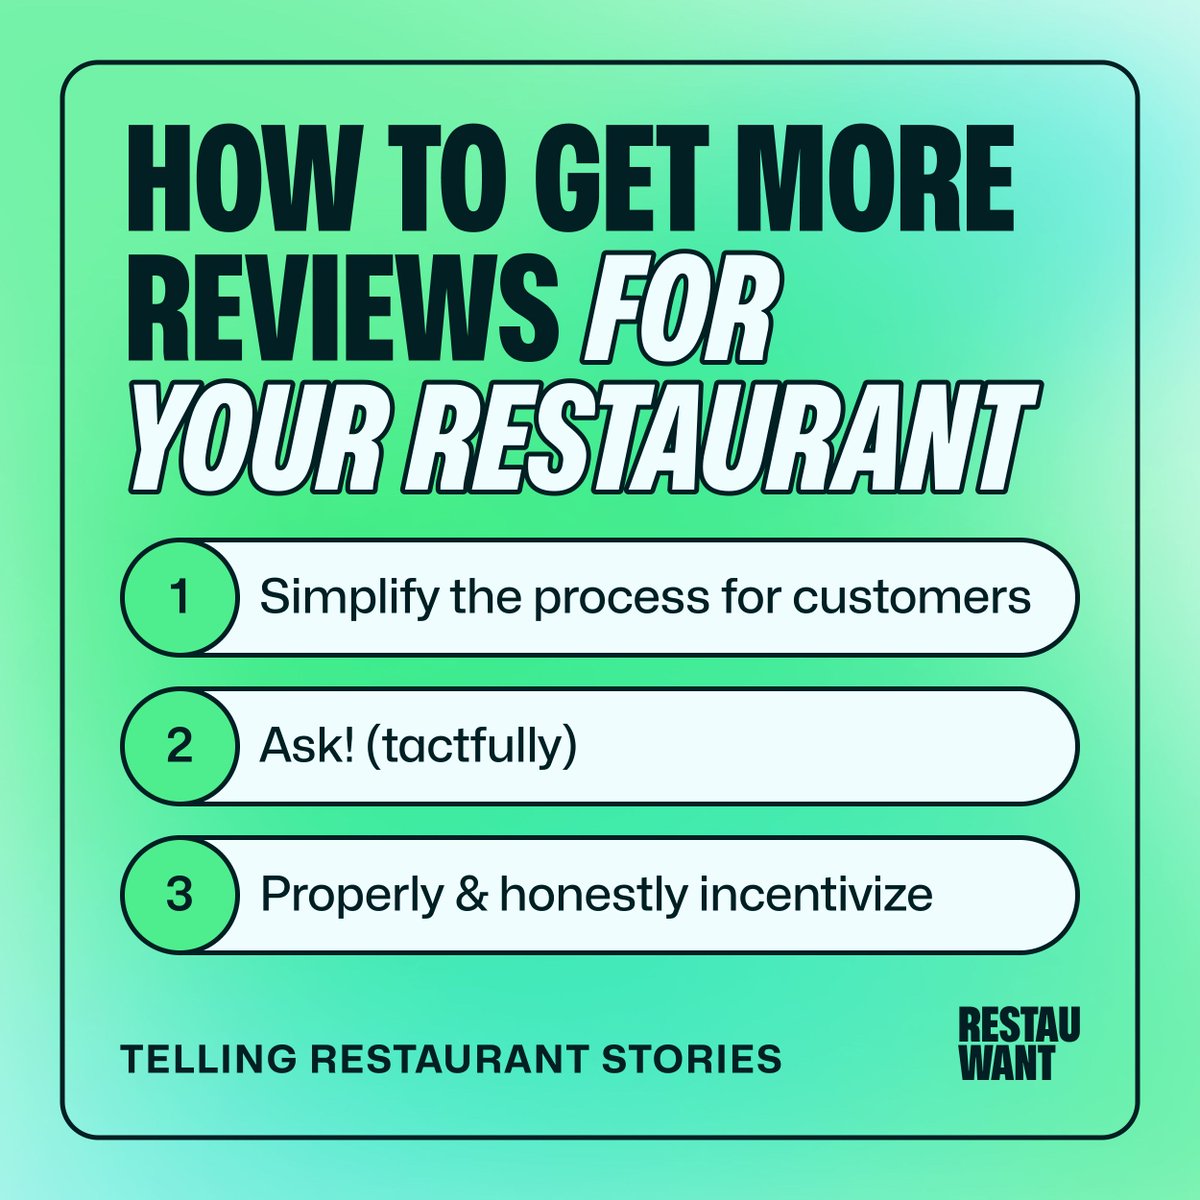 Reviews drive modern diners' buying decisions. Why you vs the eatery next door? Often, it comes down to customer experiences.

#restaurantmarketing #restaurantmarketingtips #restaurantmarketingagency #restaurantreviews